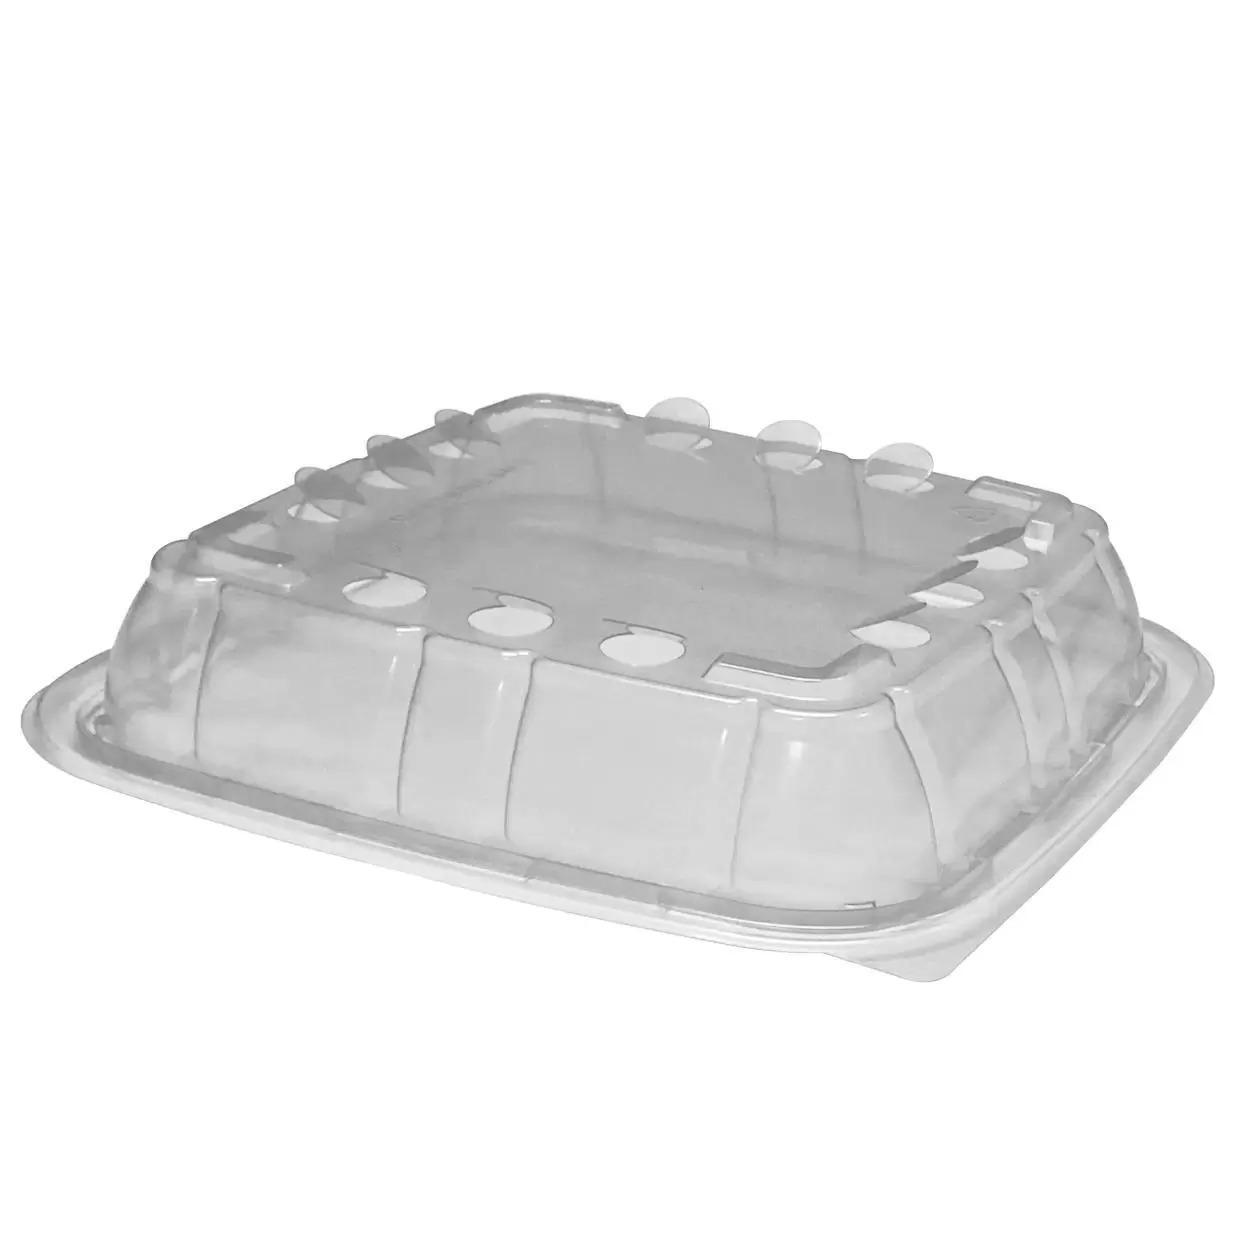 Holiday 8 inch Square Foil Pan with Dome Lid